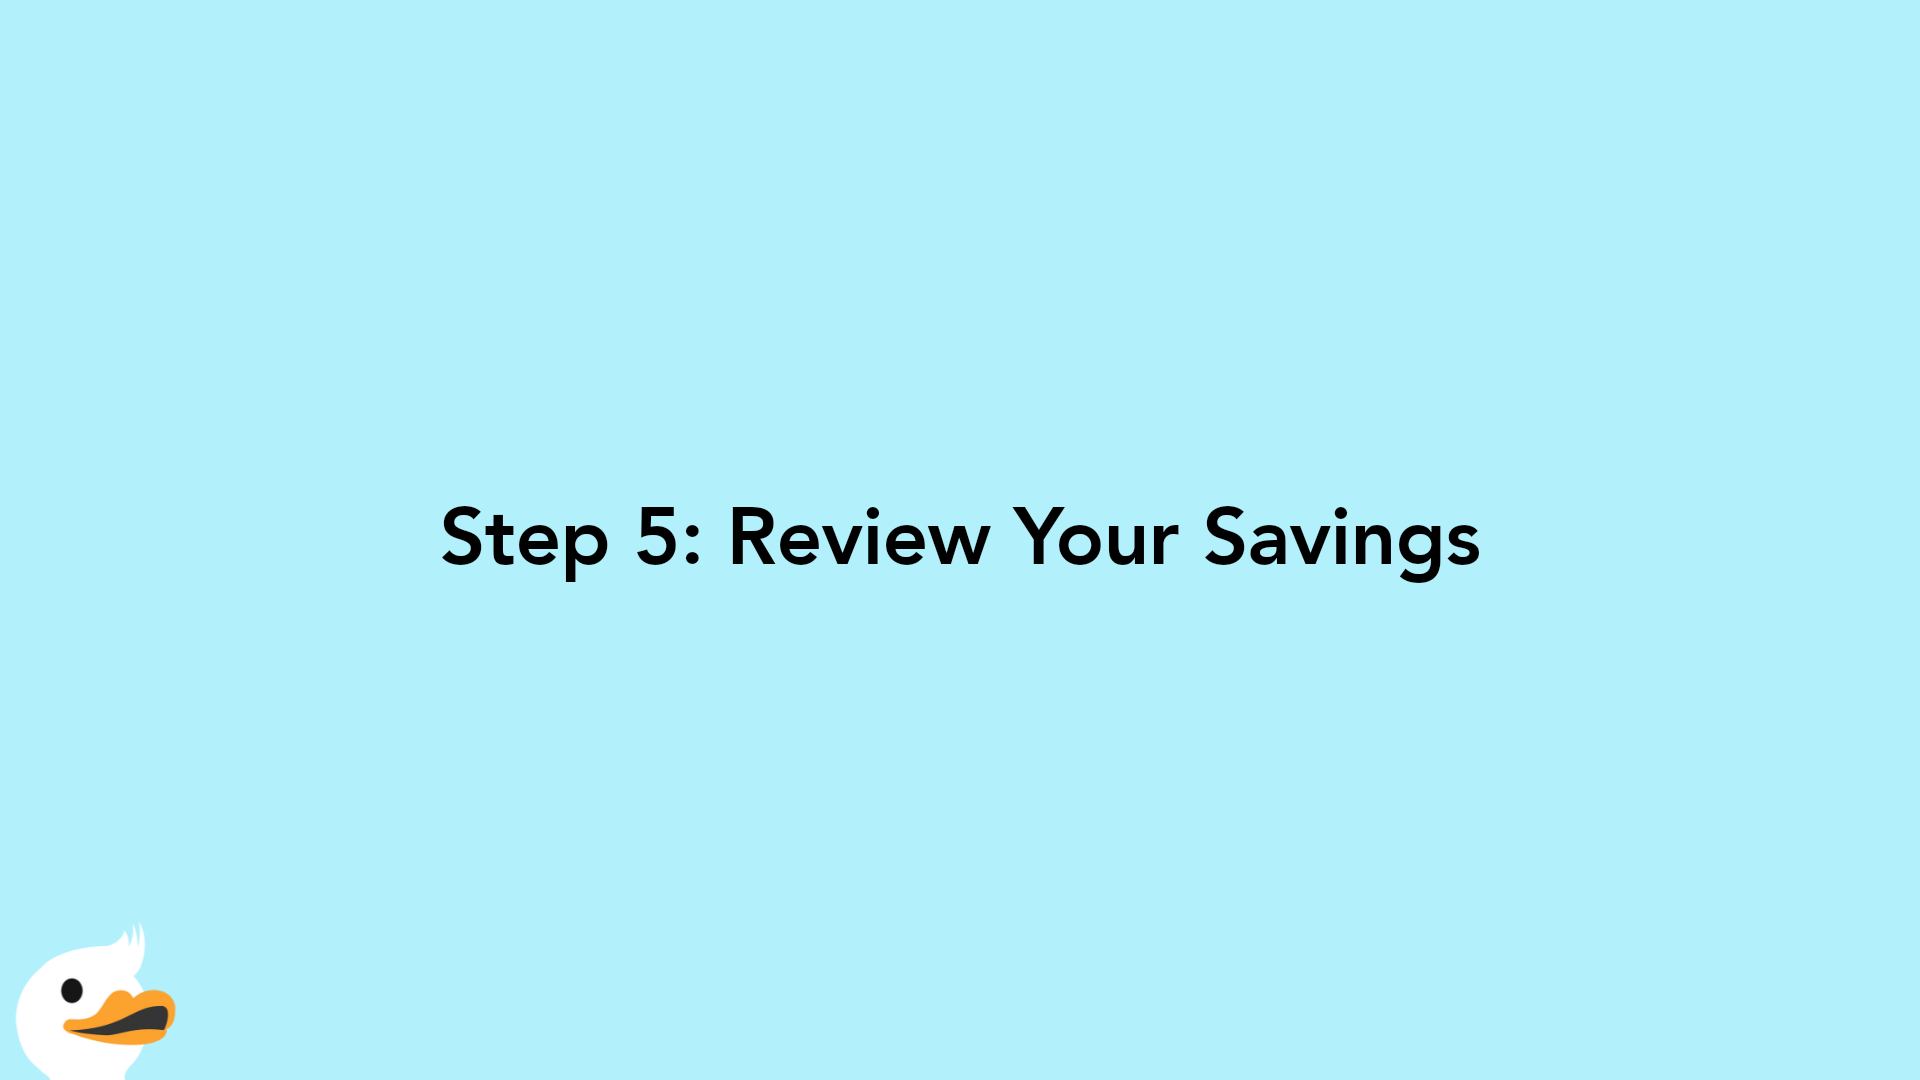 Step 5: Review Your Savings